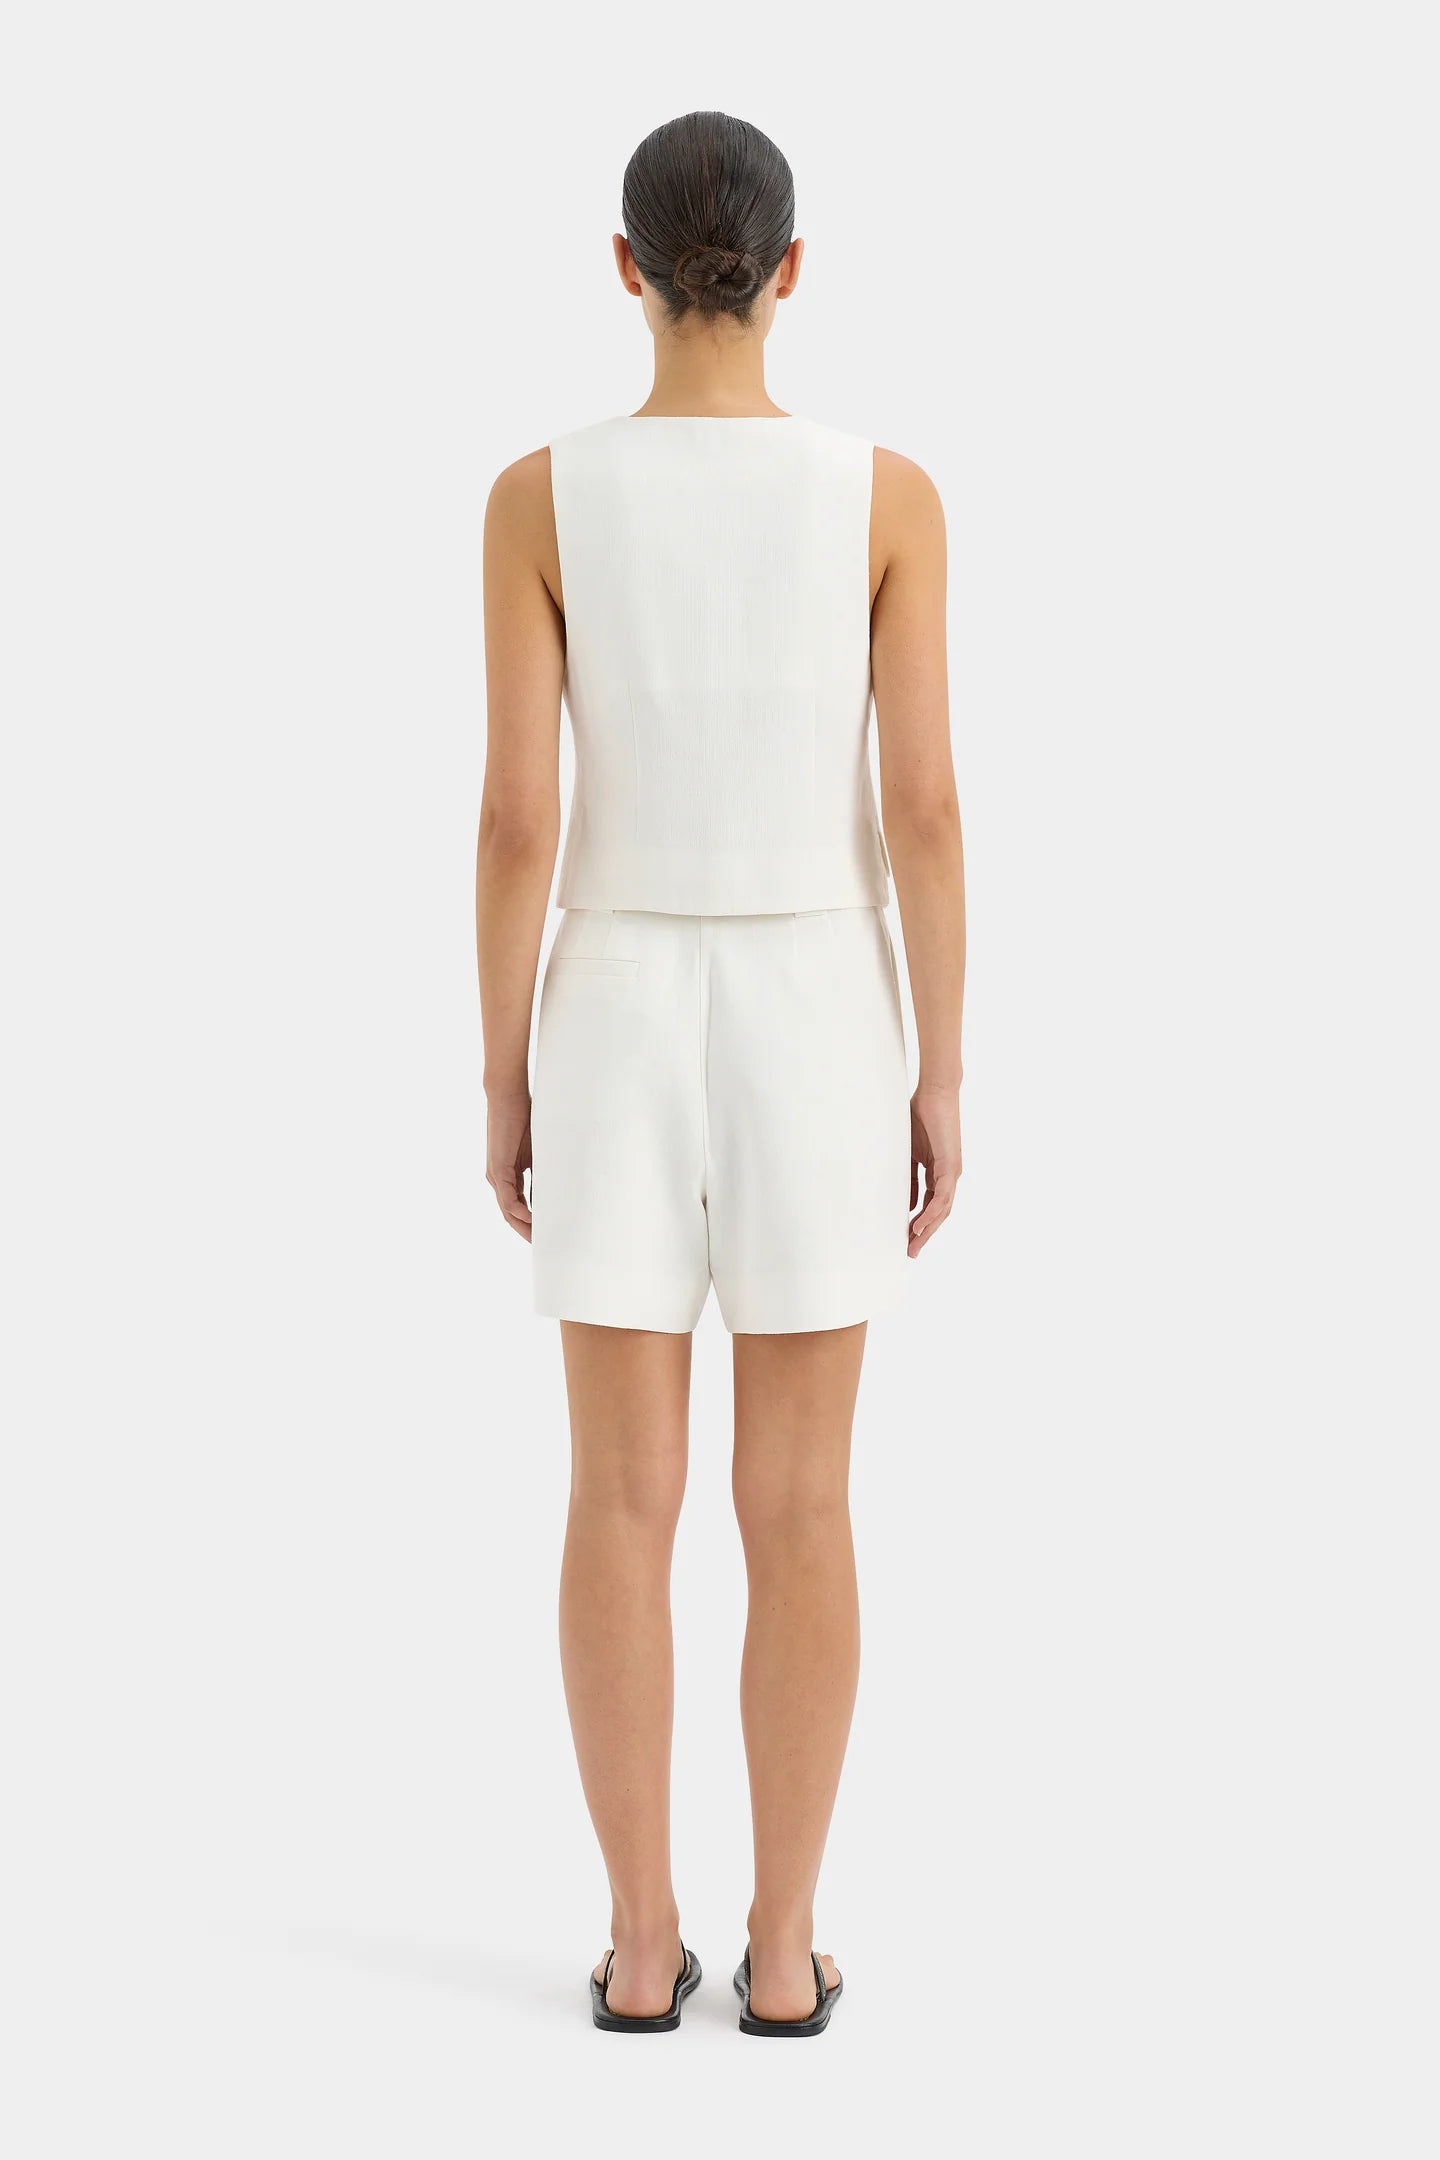 SIR. Clemence Tailored Short - Ivory